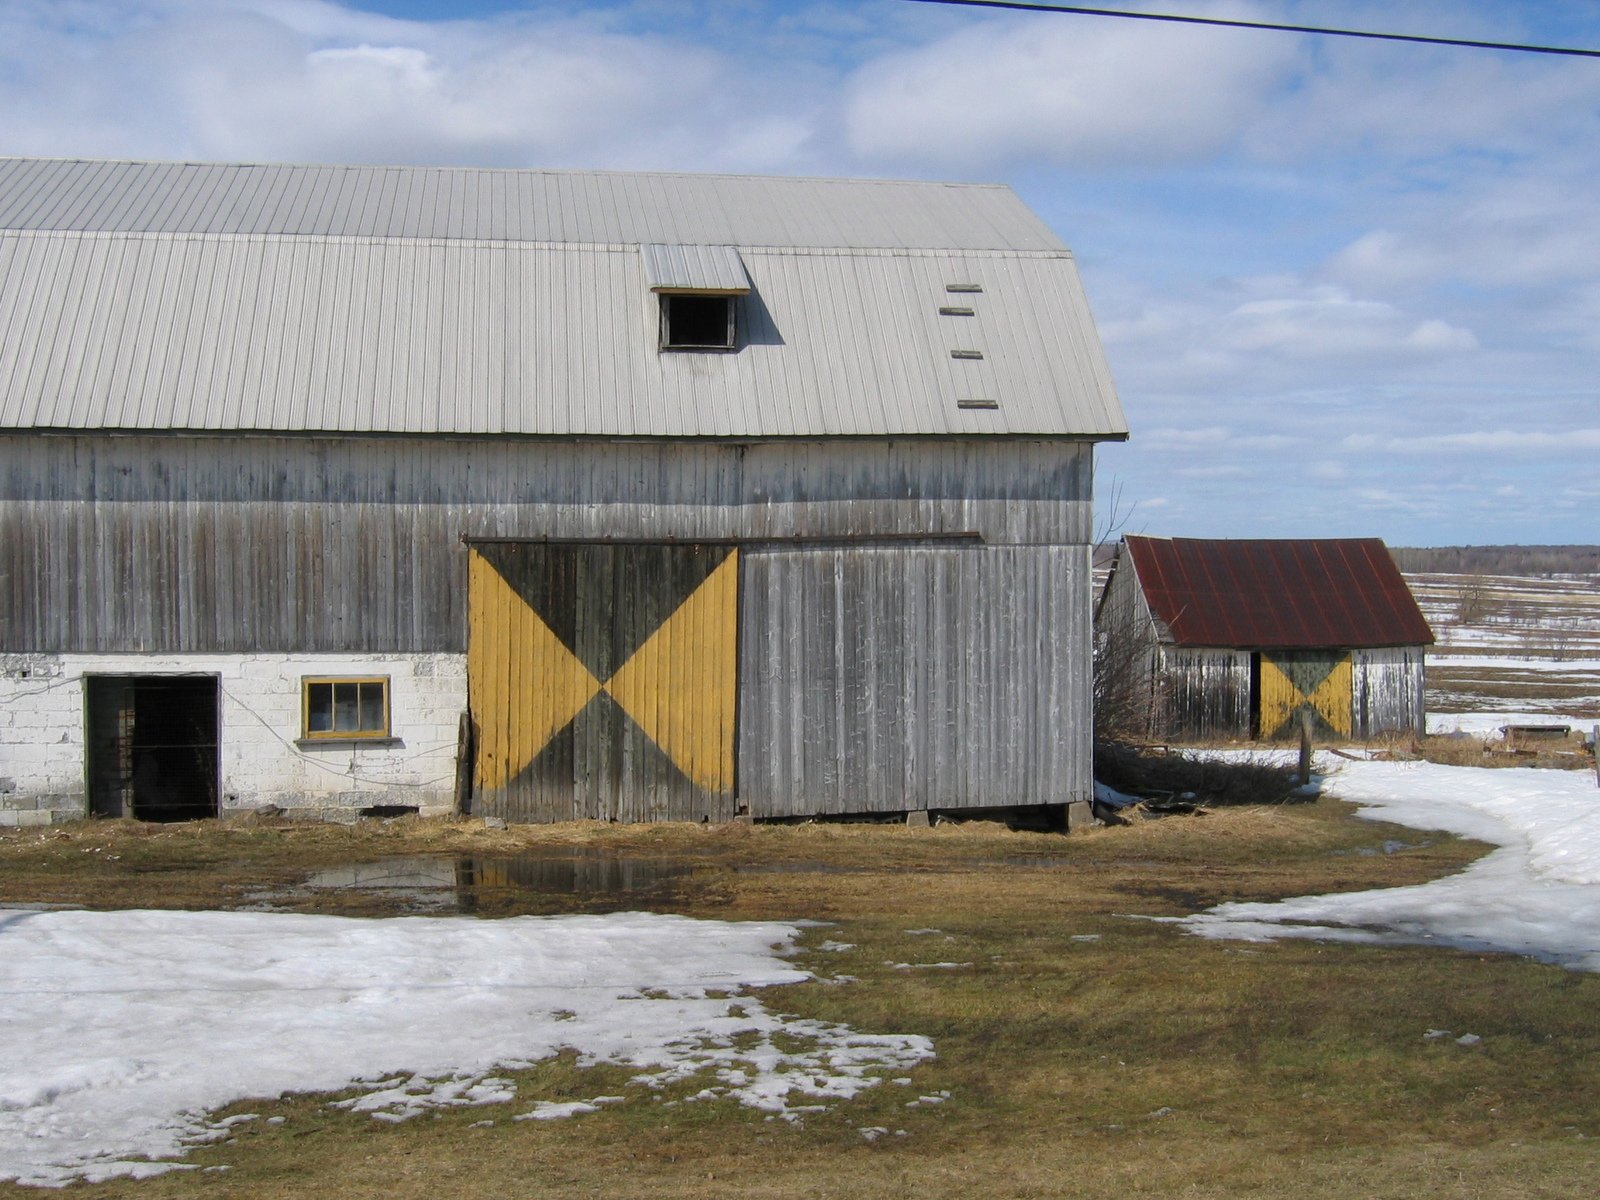 two barns on the side of a snowy field